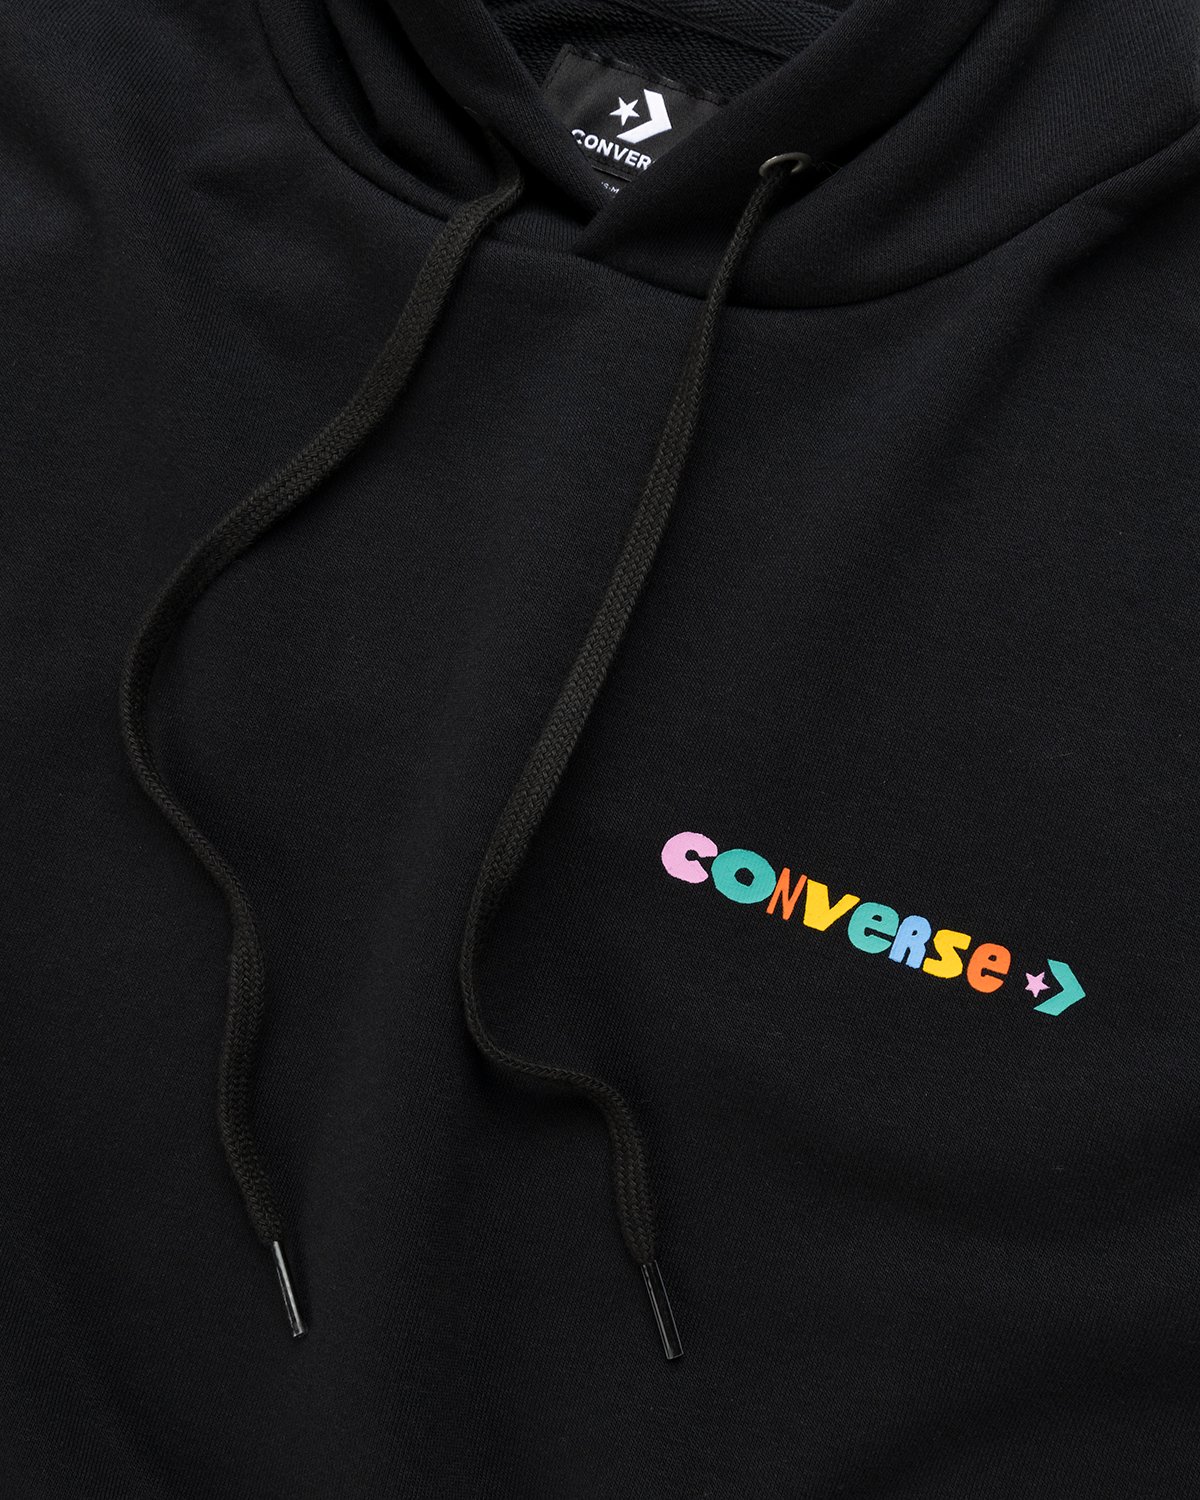 Converse - Much Love Graphic Hoodie Black - Clothing - Black - Image 5